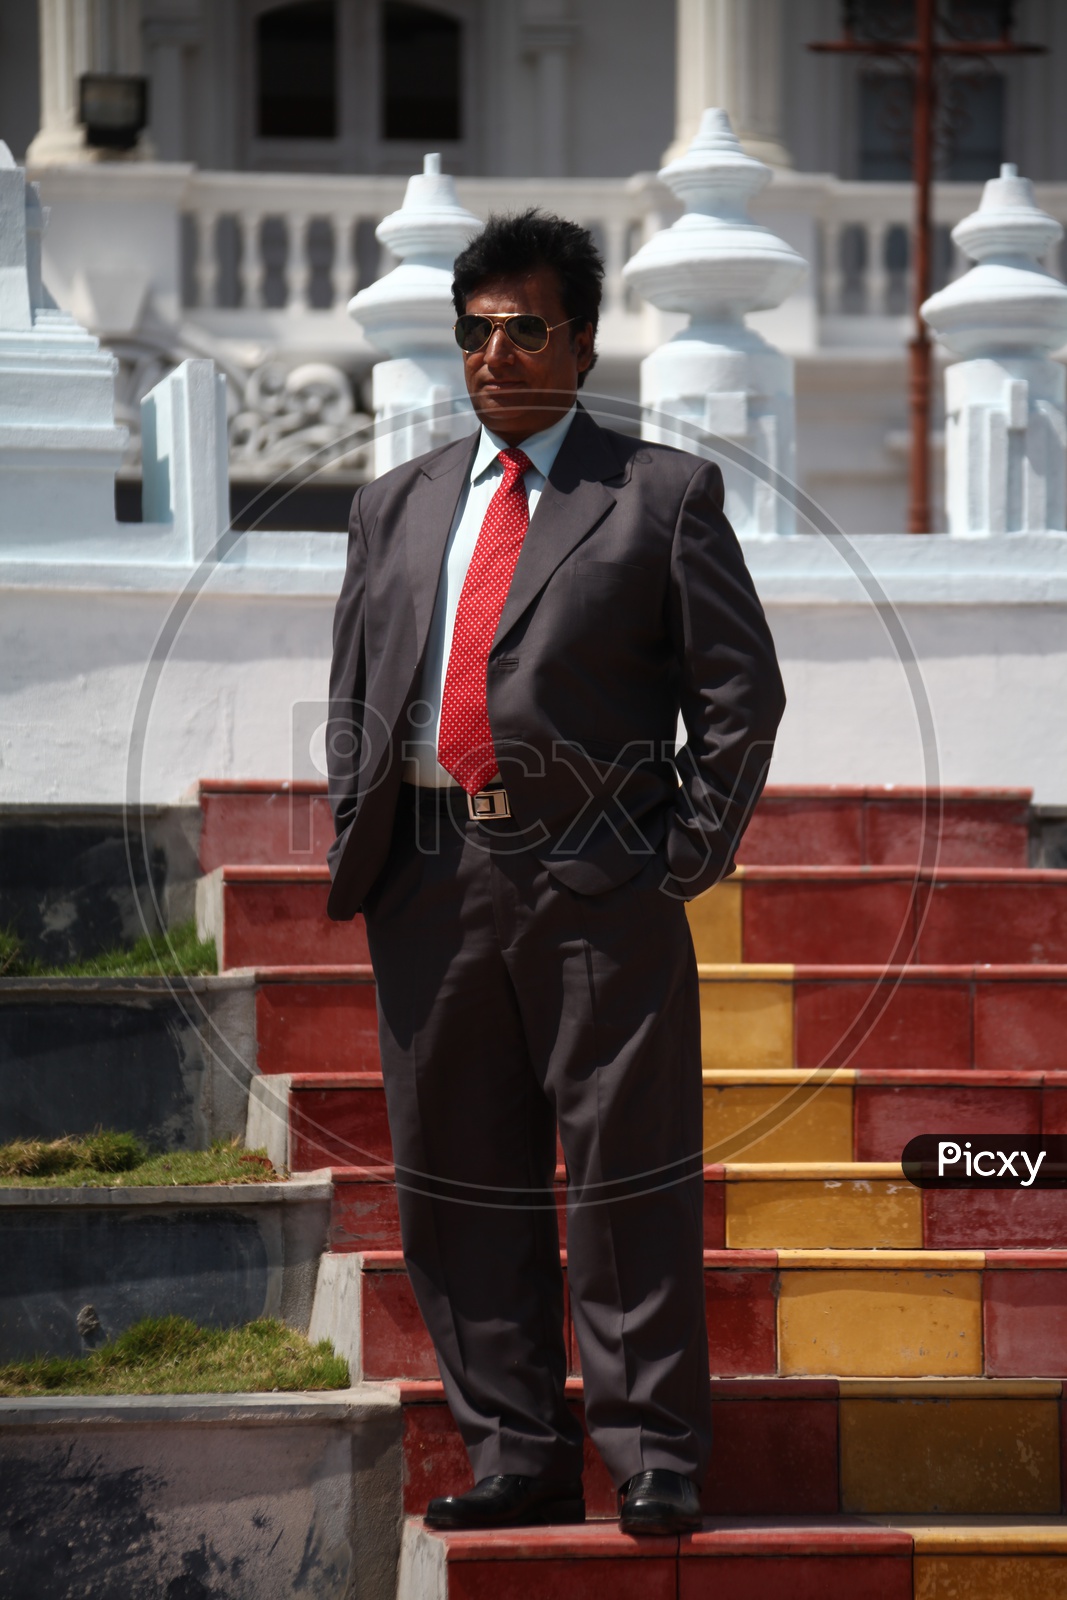 A man walking down the stairs in suit with goggles